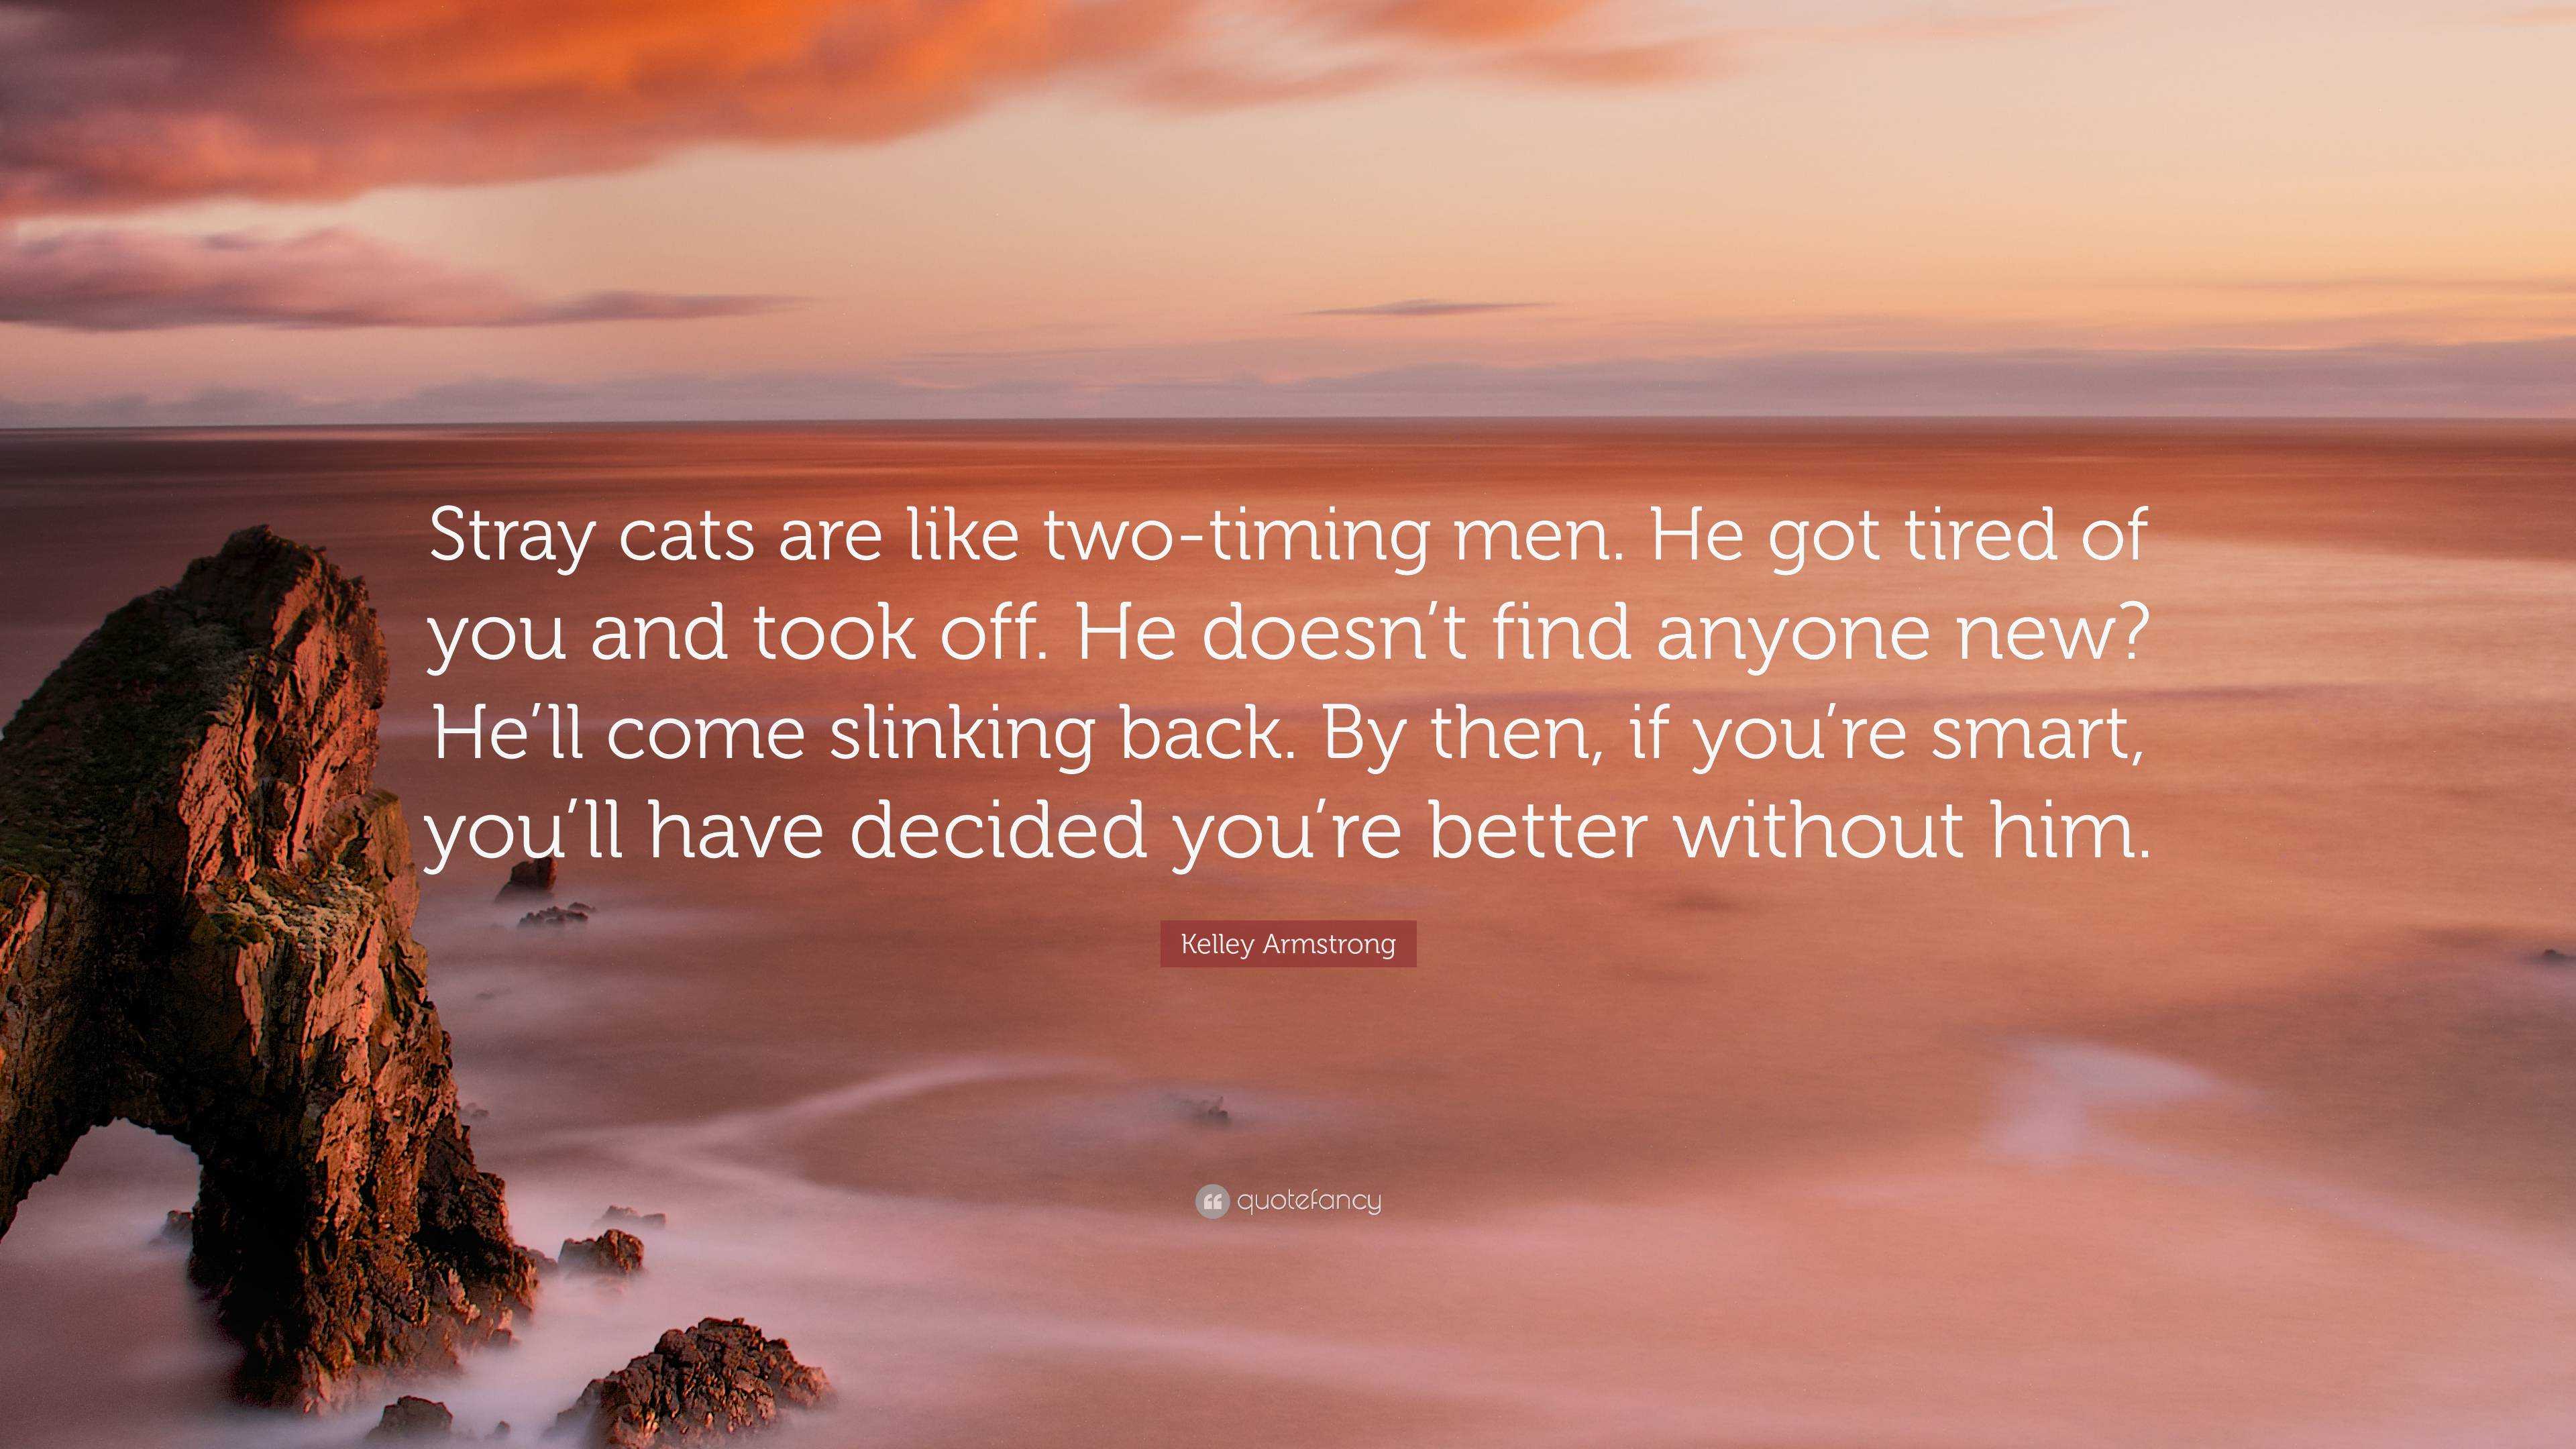 Kelley Armstrong Quote: “Stray cats are like two-timing men. He got